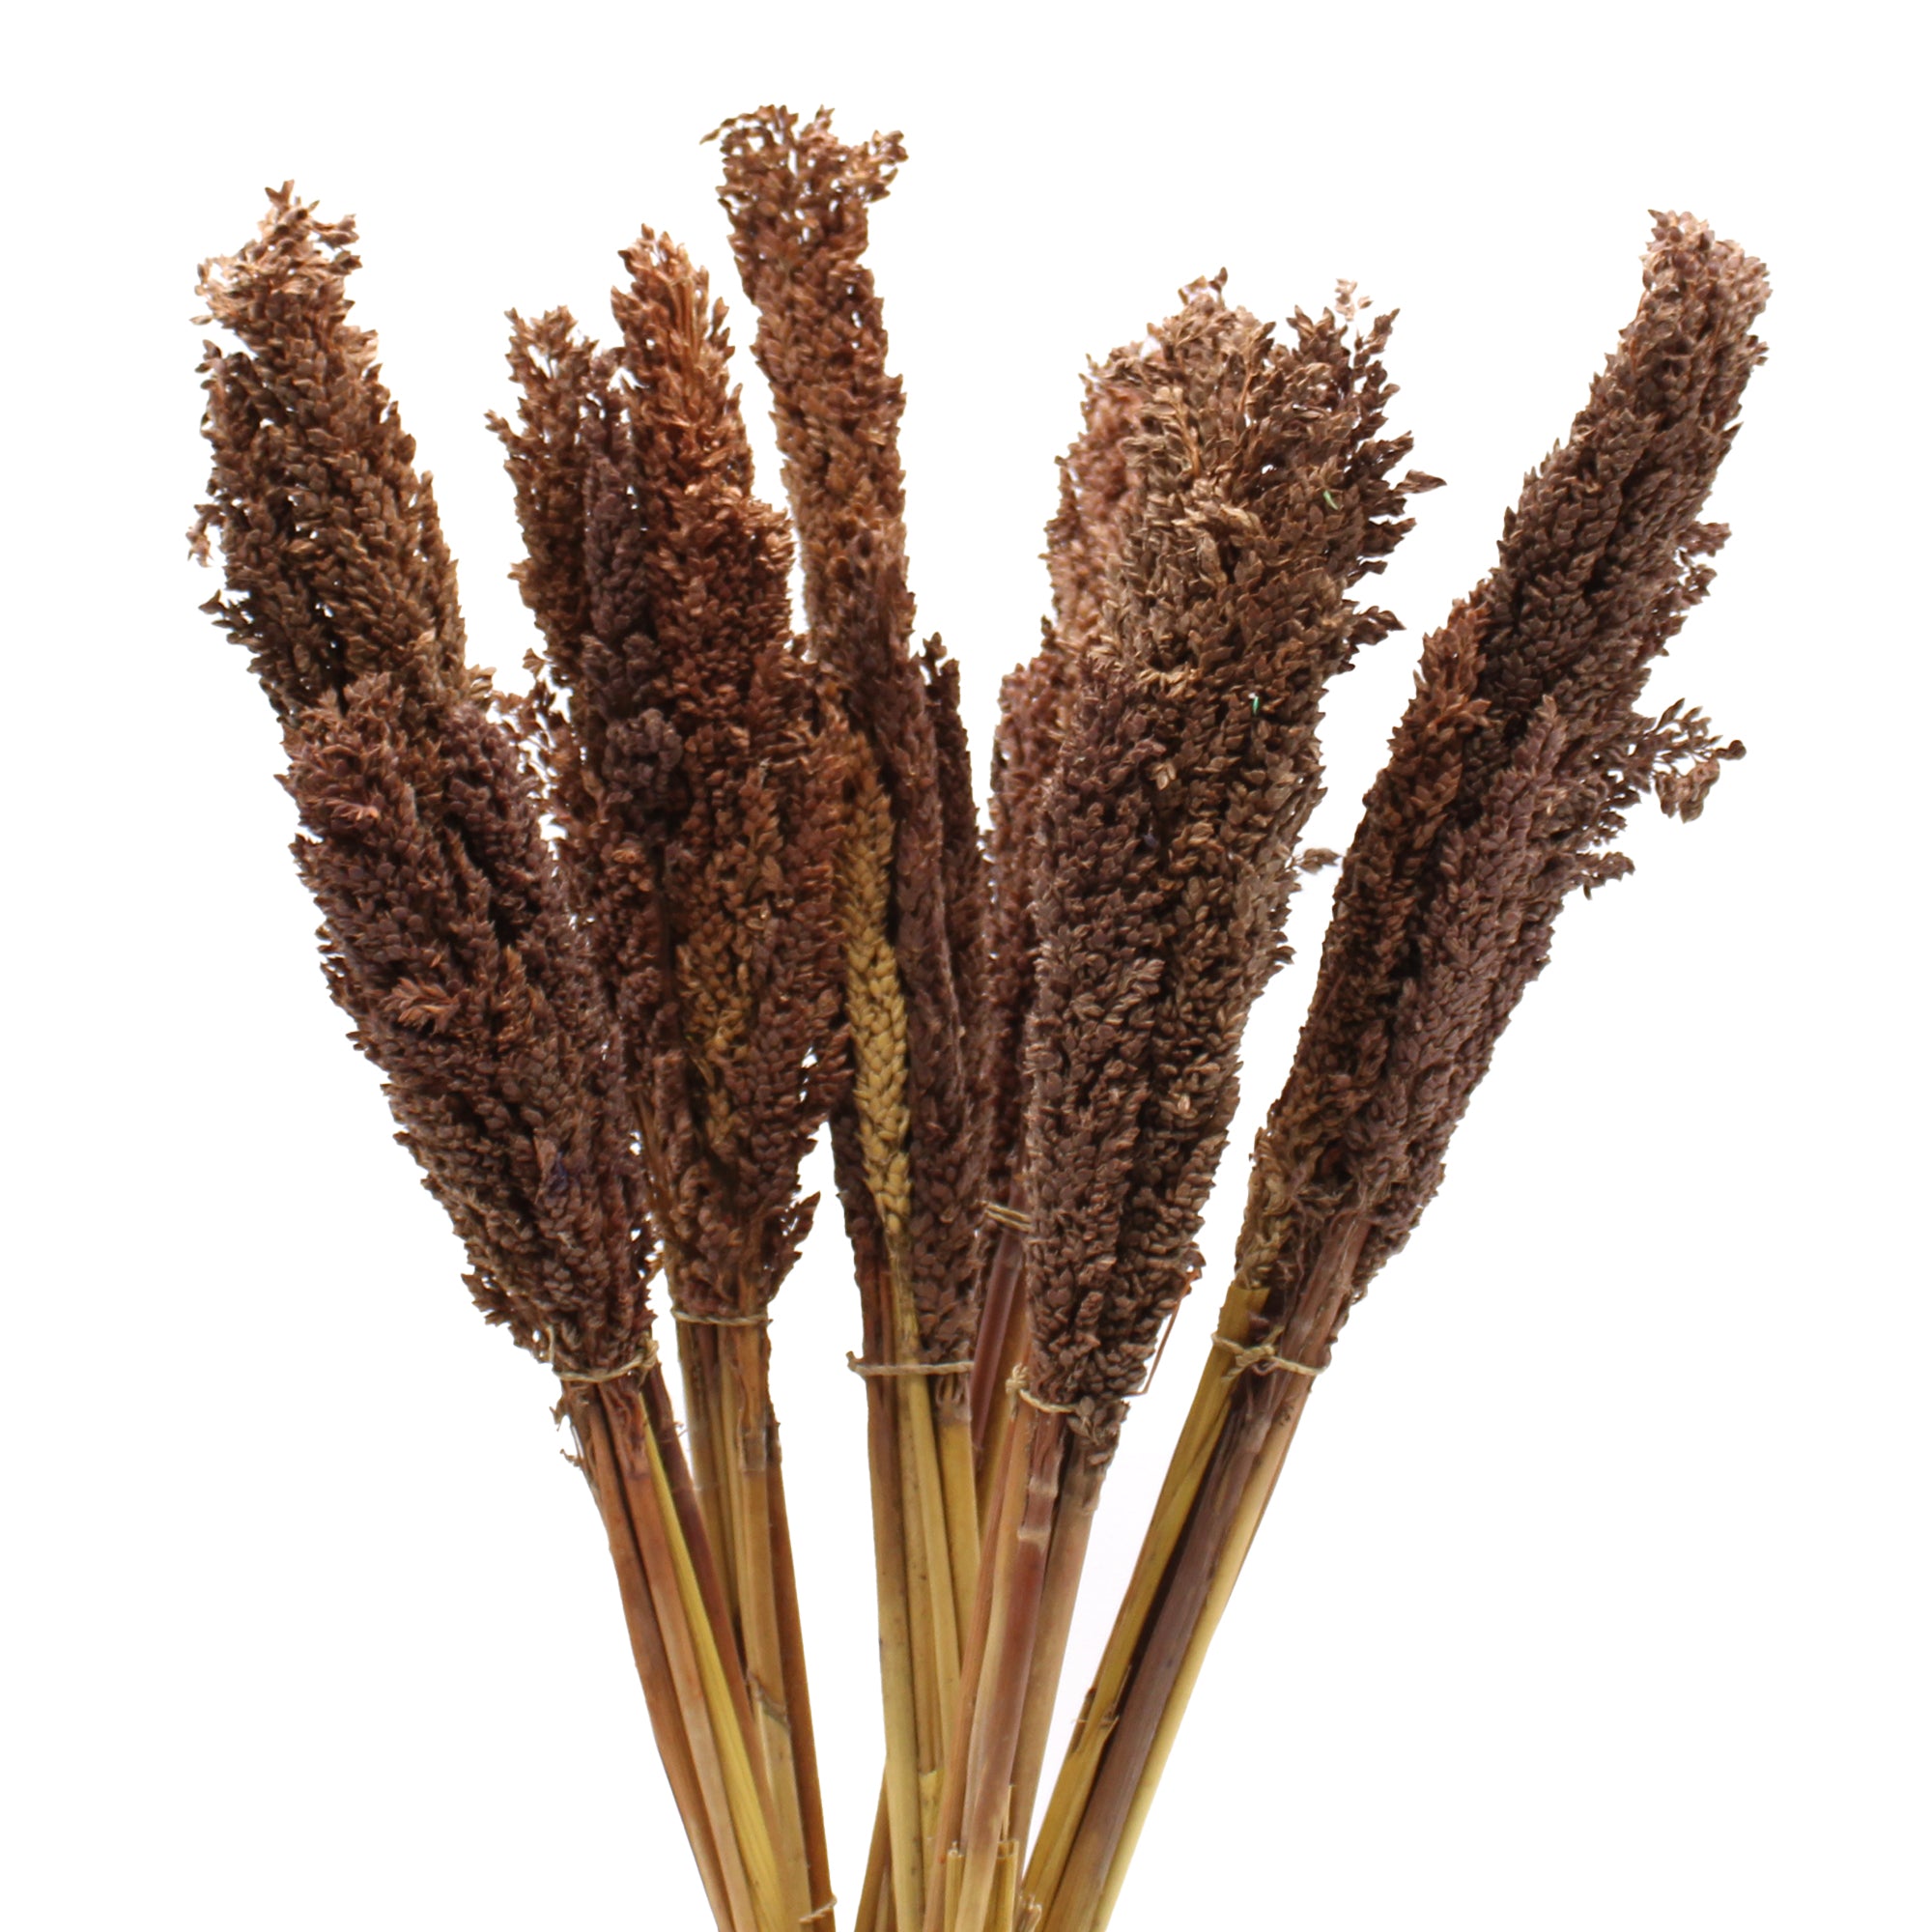 Cantal Grass Bunch - Chocolate